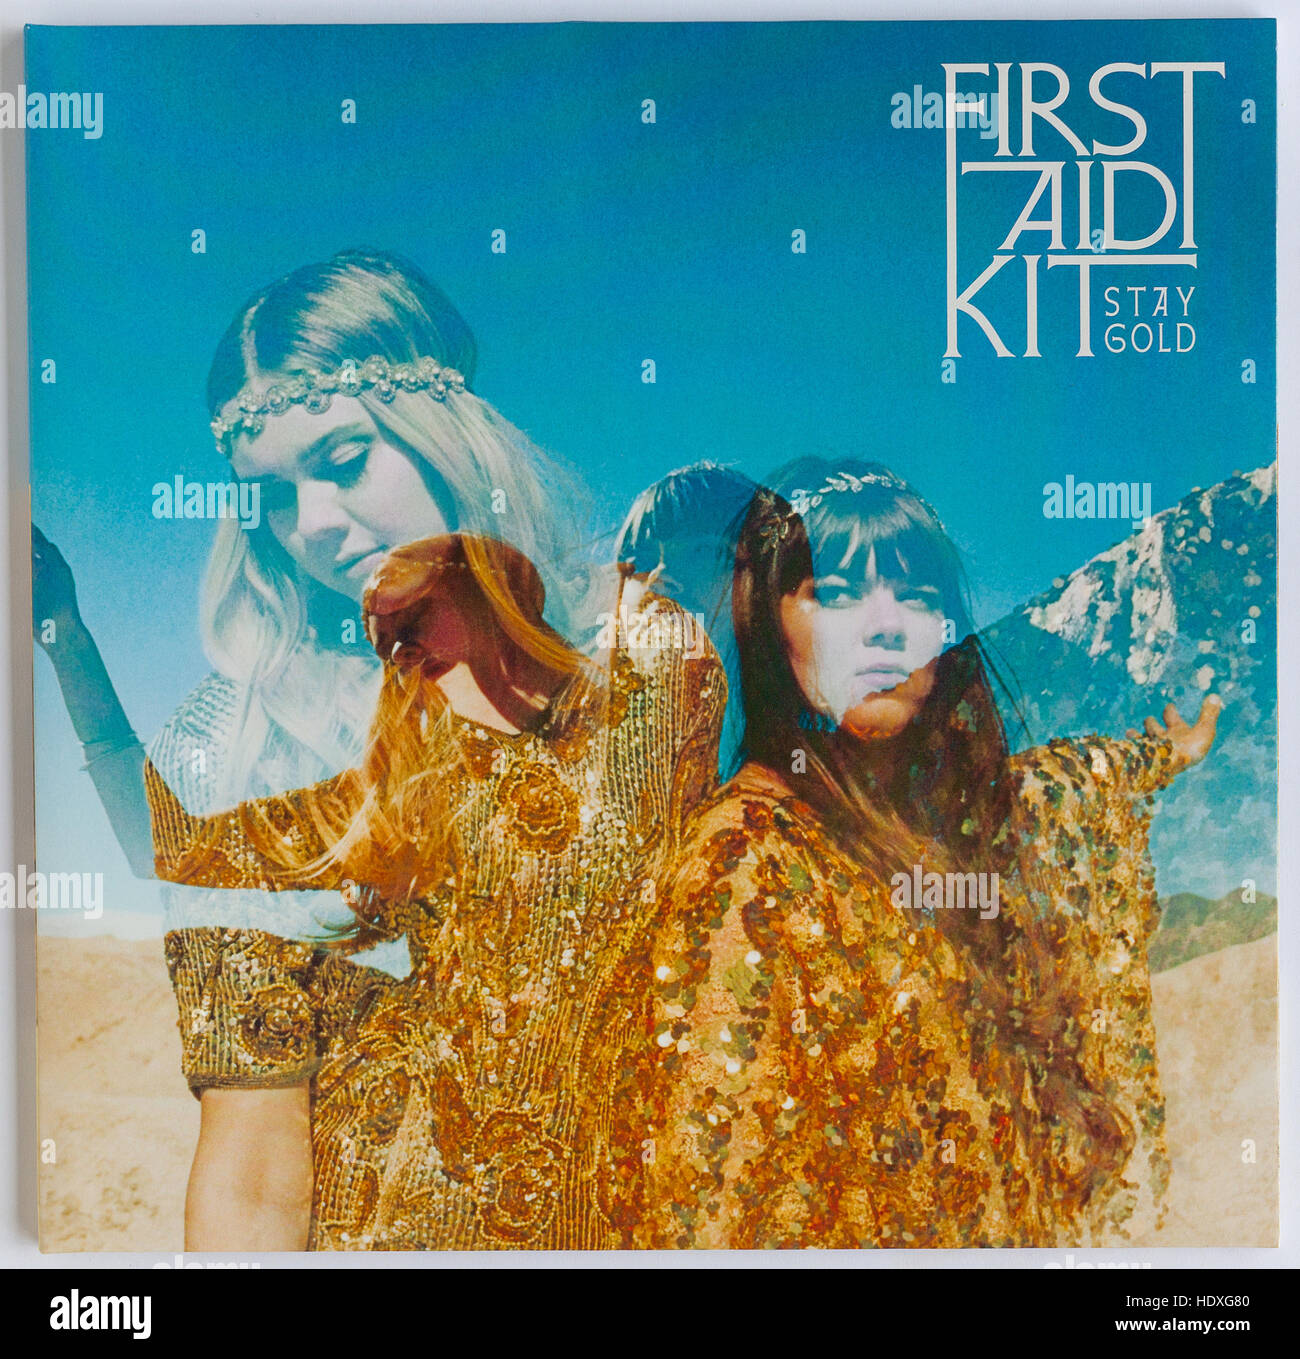 The cover of 'Stay Gold', 2014 album by First Aid Kit - Editorial use only Stock Photo